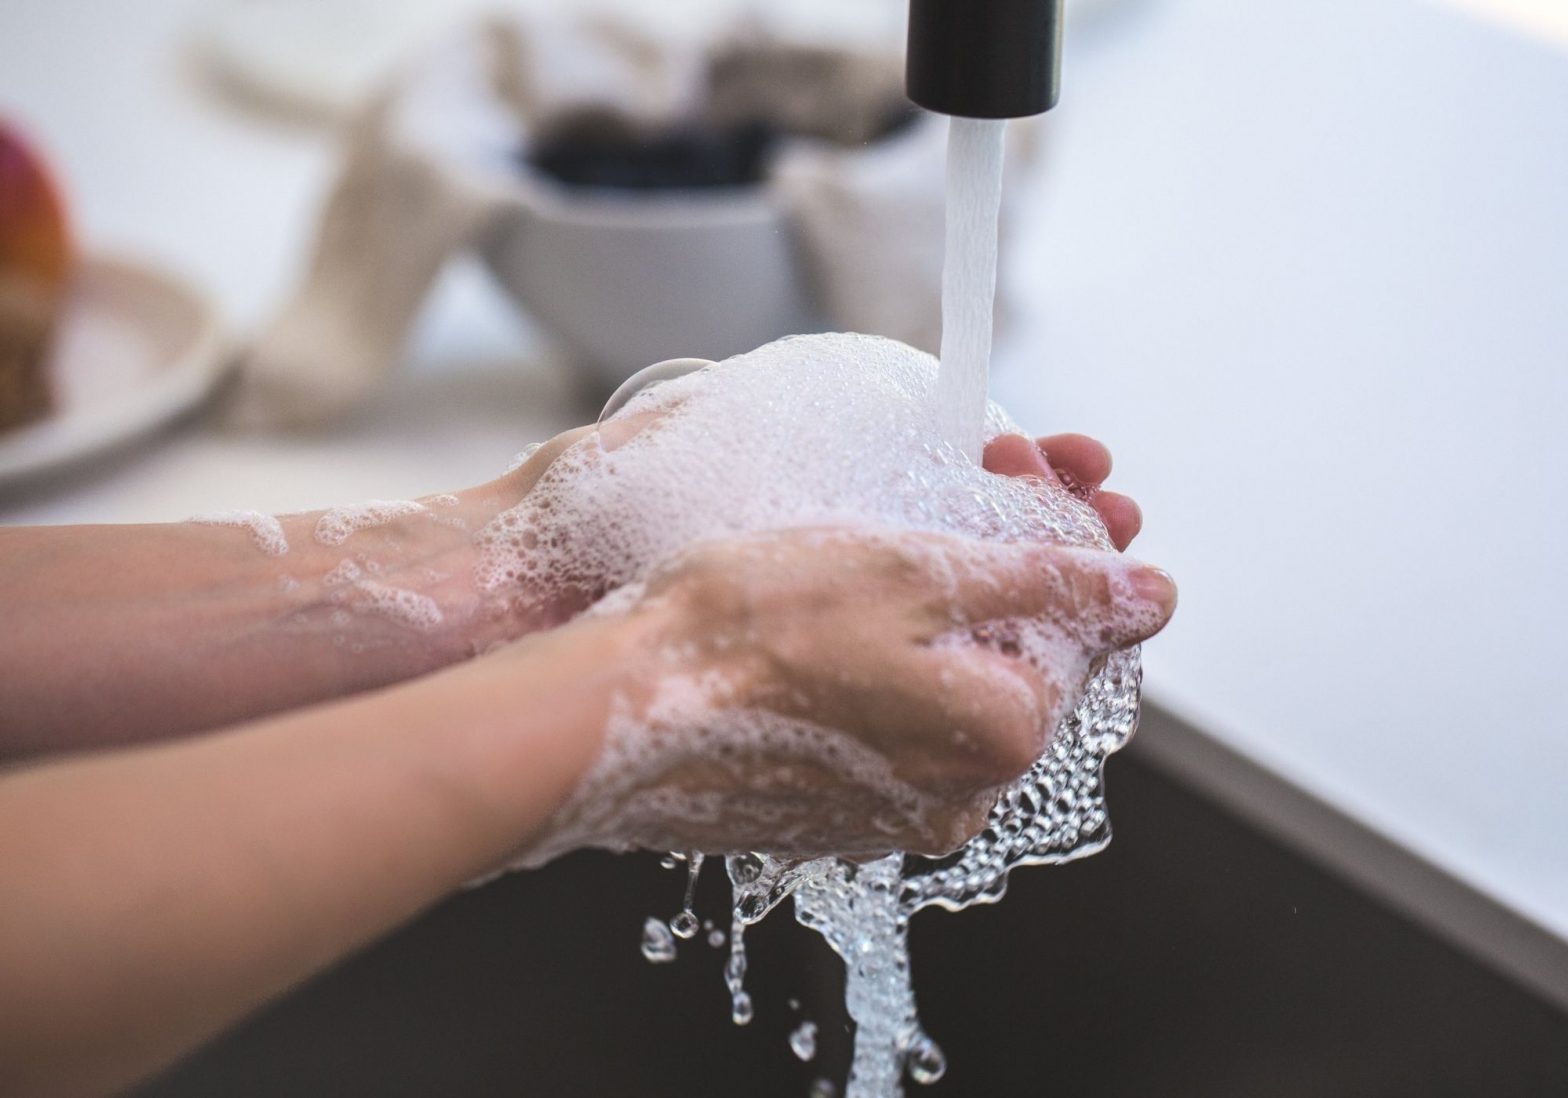 Hands covered in soapy bubbles under a running faucet